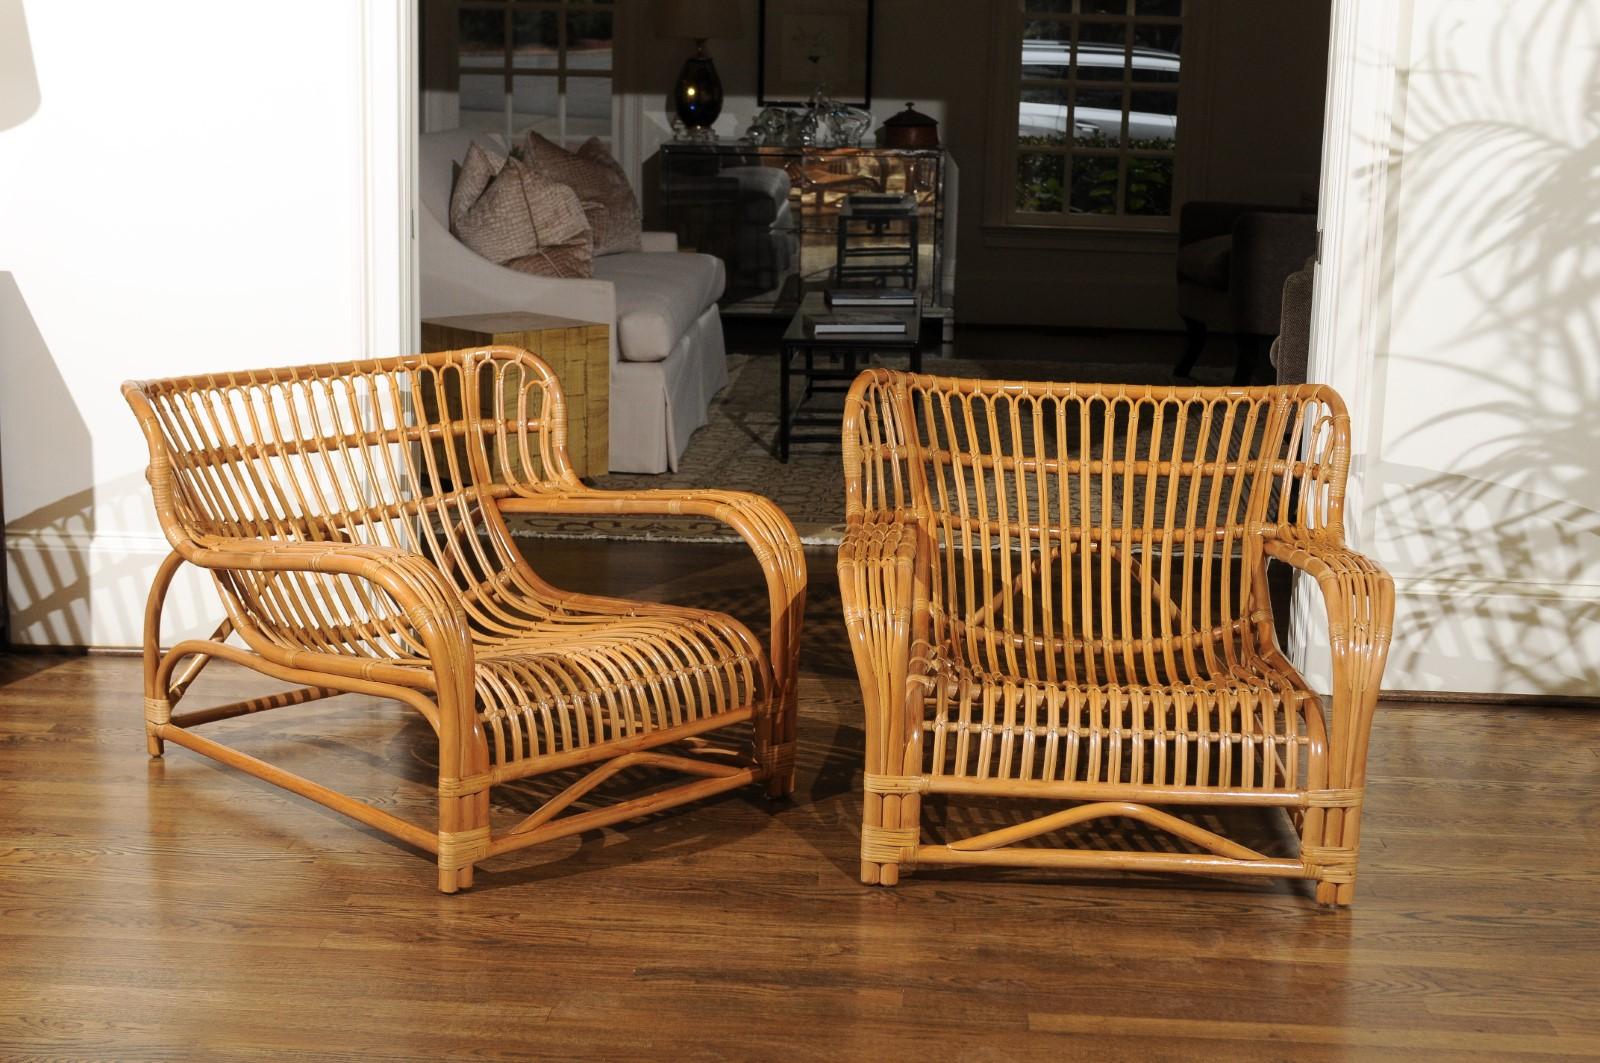 A spectacular pair of custom made rattan lounge chairs, circa 1995. This particular design was inspired by the groundbreaking Viggo Boesen model VB 136 chair originally produced by E.V.A. Nissen and initially delivered in 1936. This fabulous pair